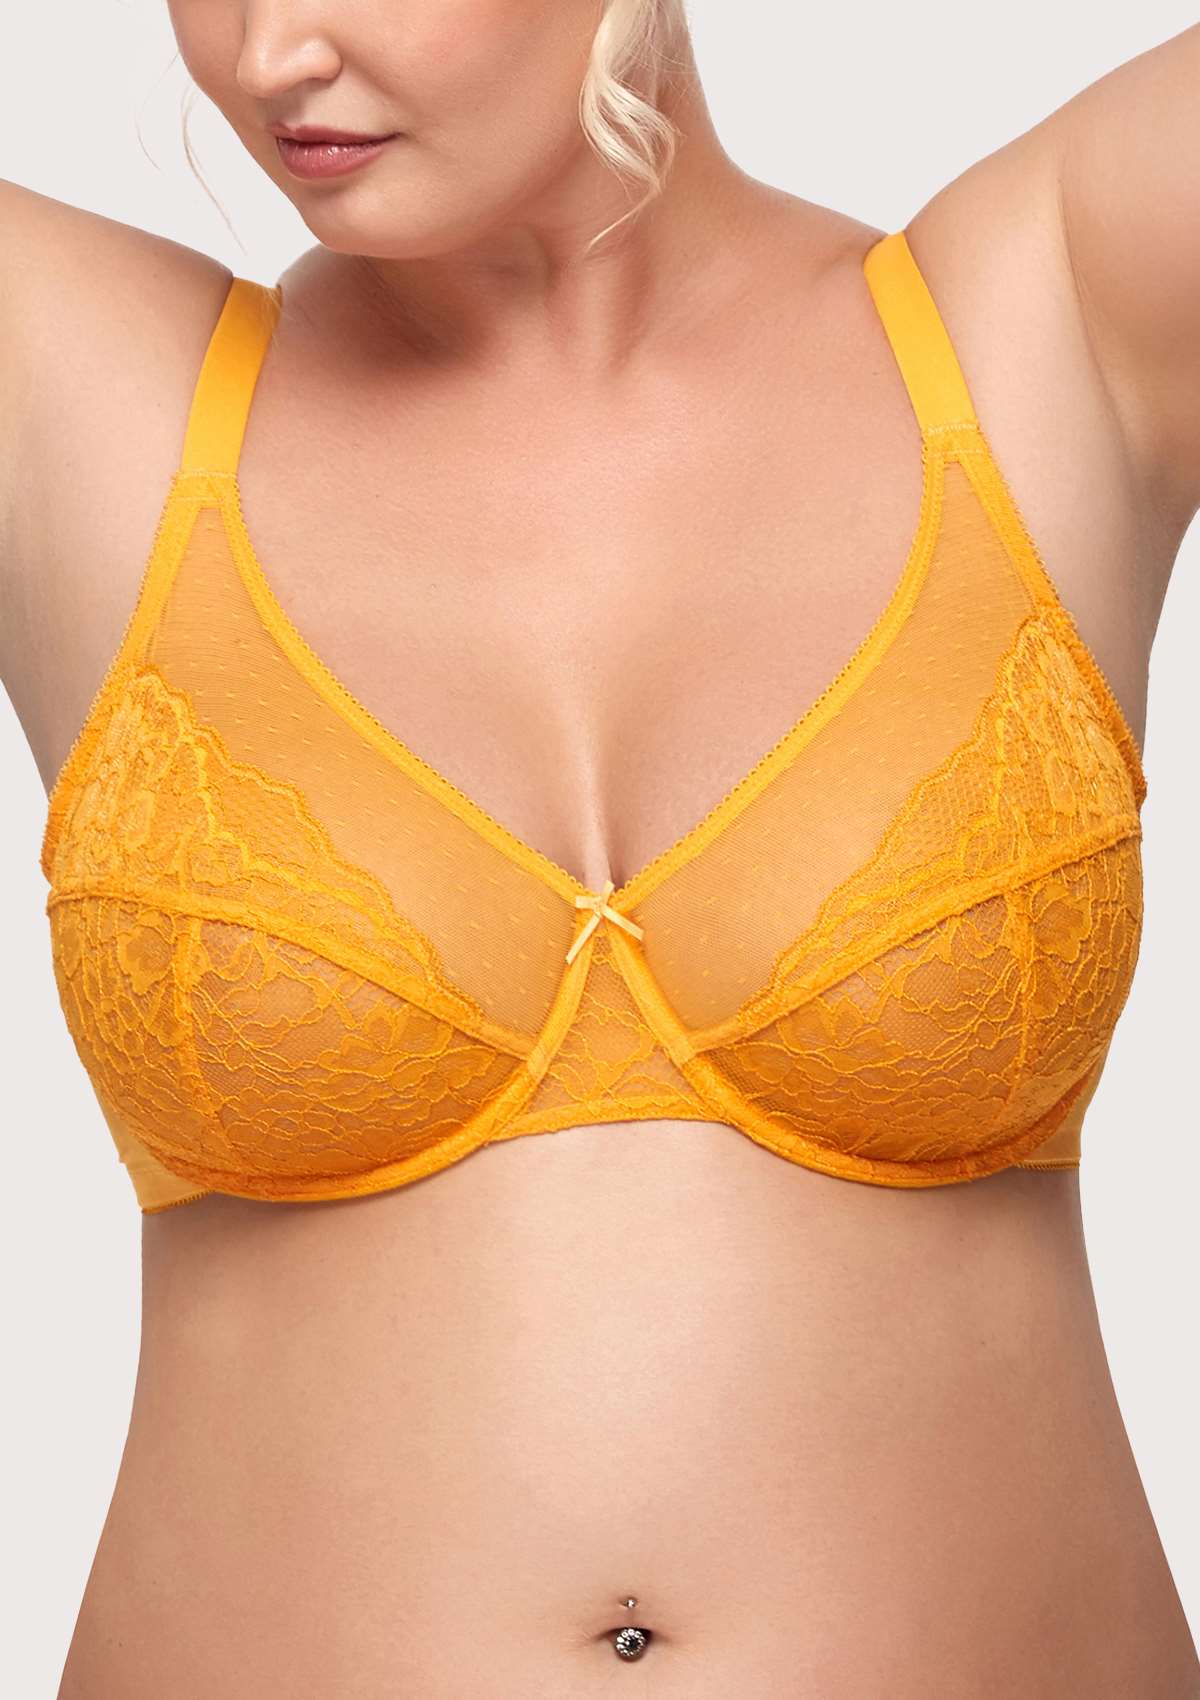 HSIA Enchante Bra And Panty Sets: Unpadded Bra With Back Support - Cadmium Yellow / 34 / G